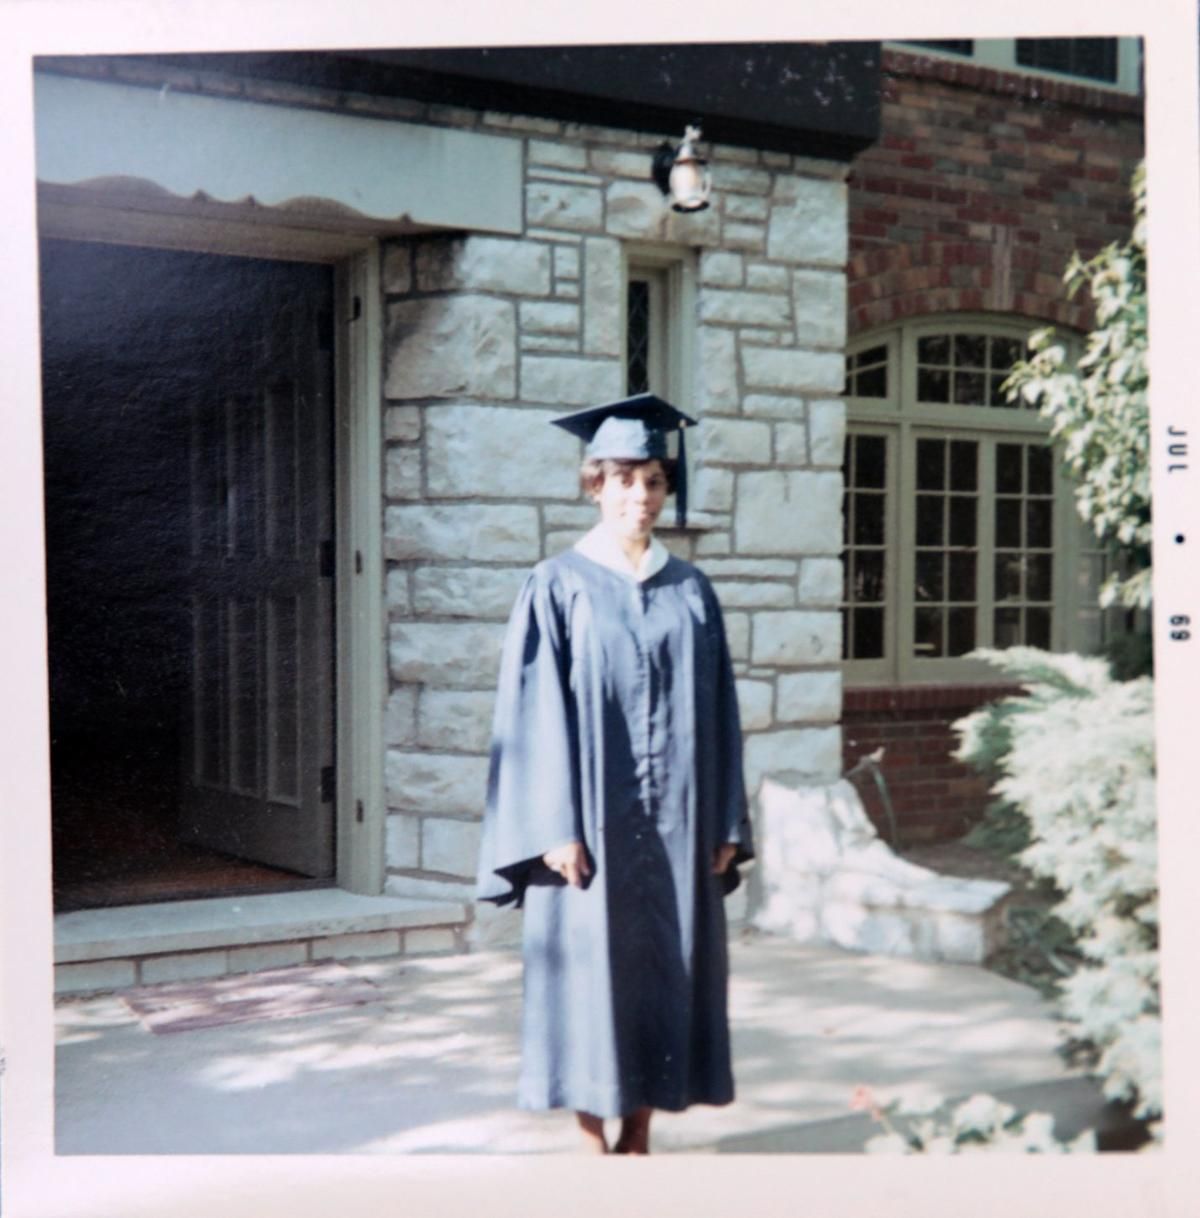 Judy Gladney poses for a photograph on the day of her graduation from University City High School in 1969. Image courtesy of Judy Gladney. United States, 1969.